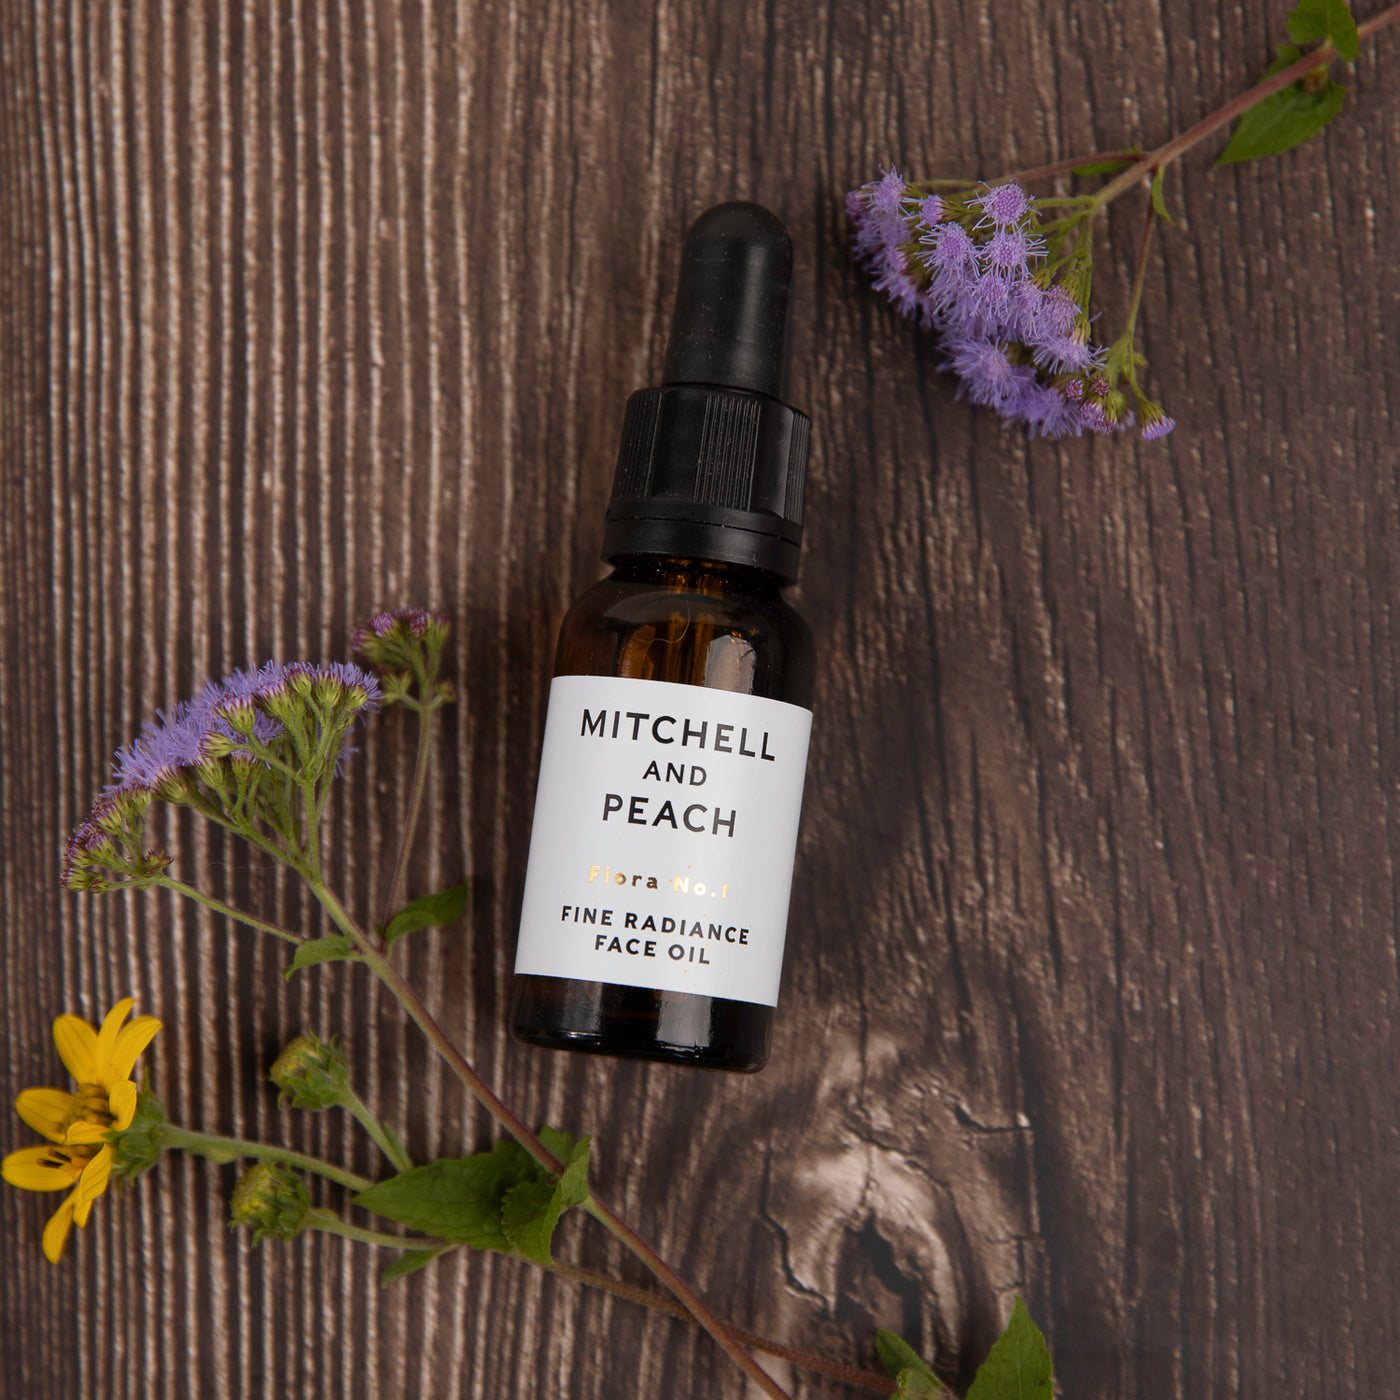 Mitchell and Peach | Fine Radiance Face Oil